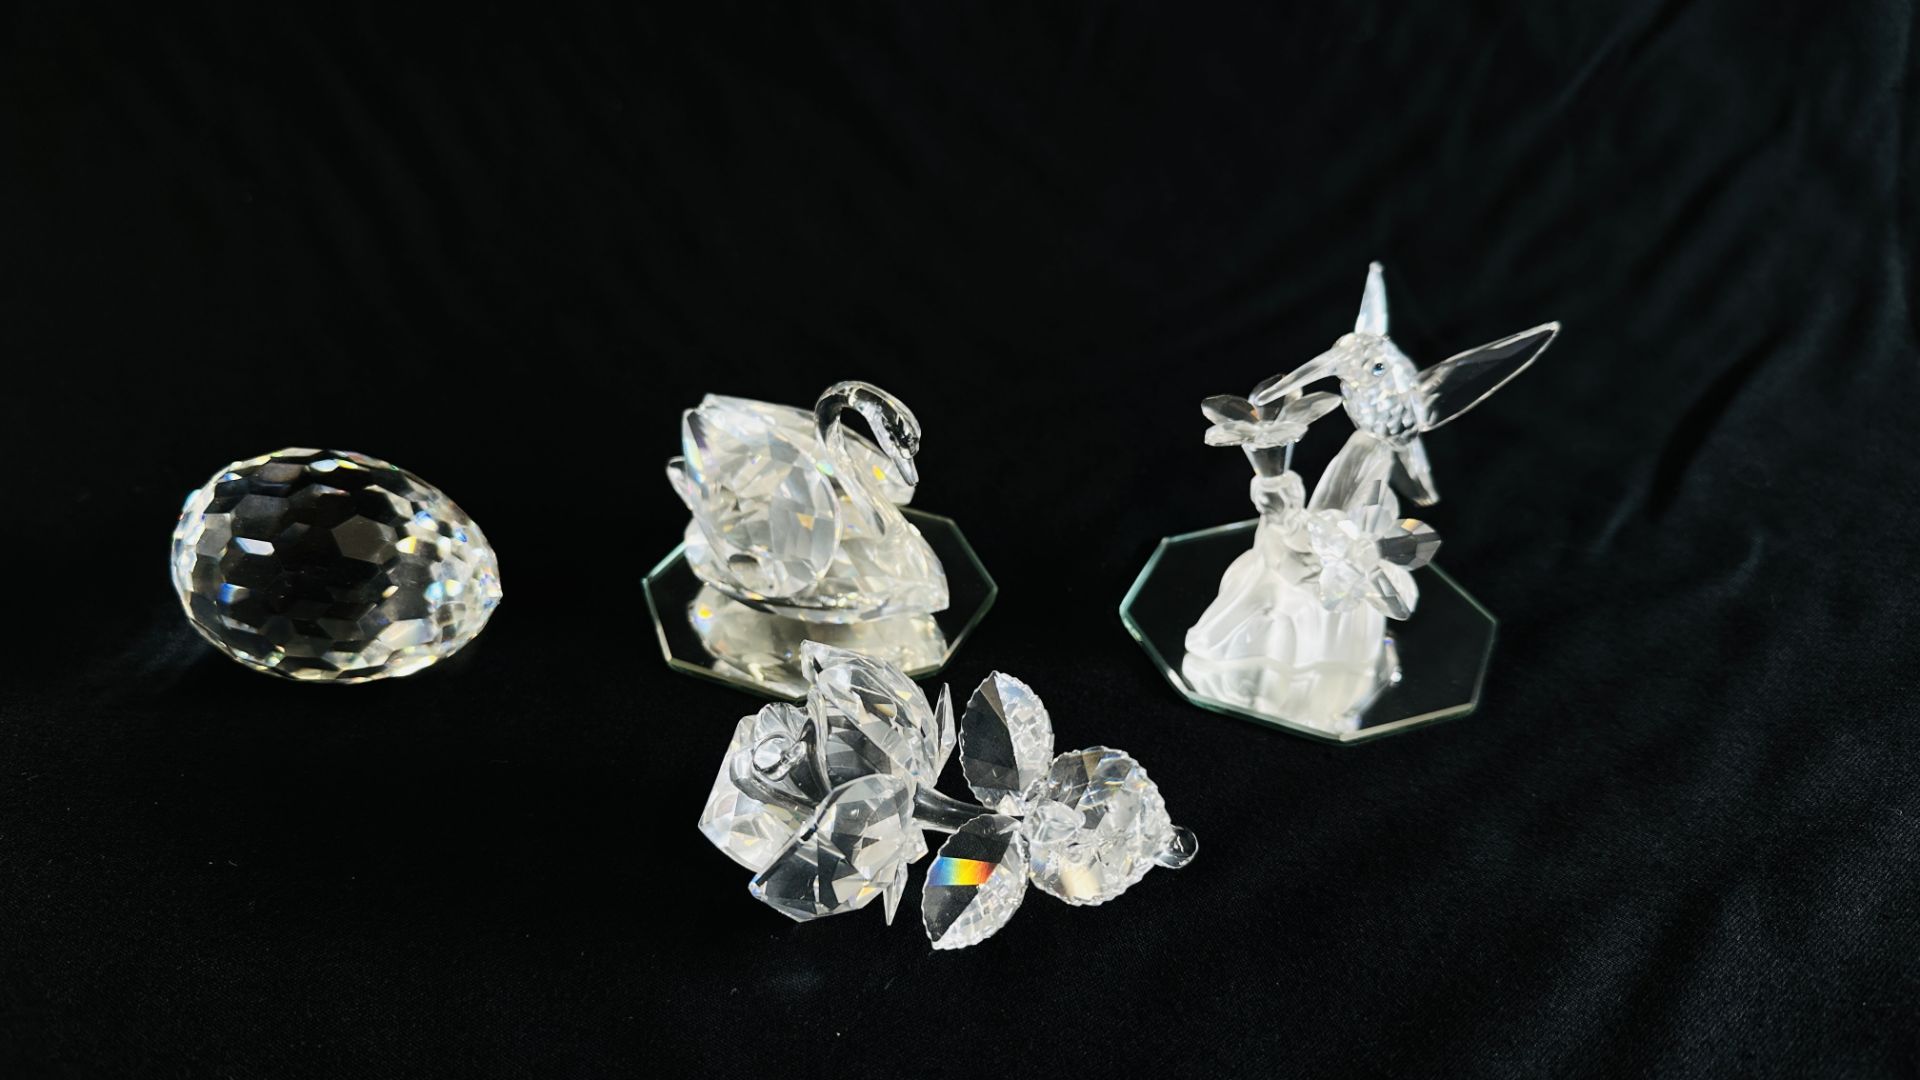 A GROUP OF 4 BOXED SWAROVSKI COLLECTIBLE ORNAMENTS TO INCLUDE ROSE (174956), HUMMINGBIRD (166184),